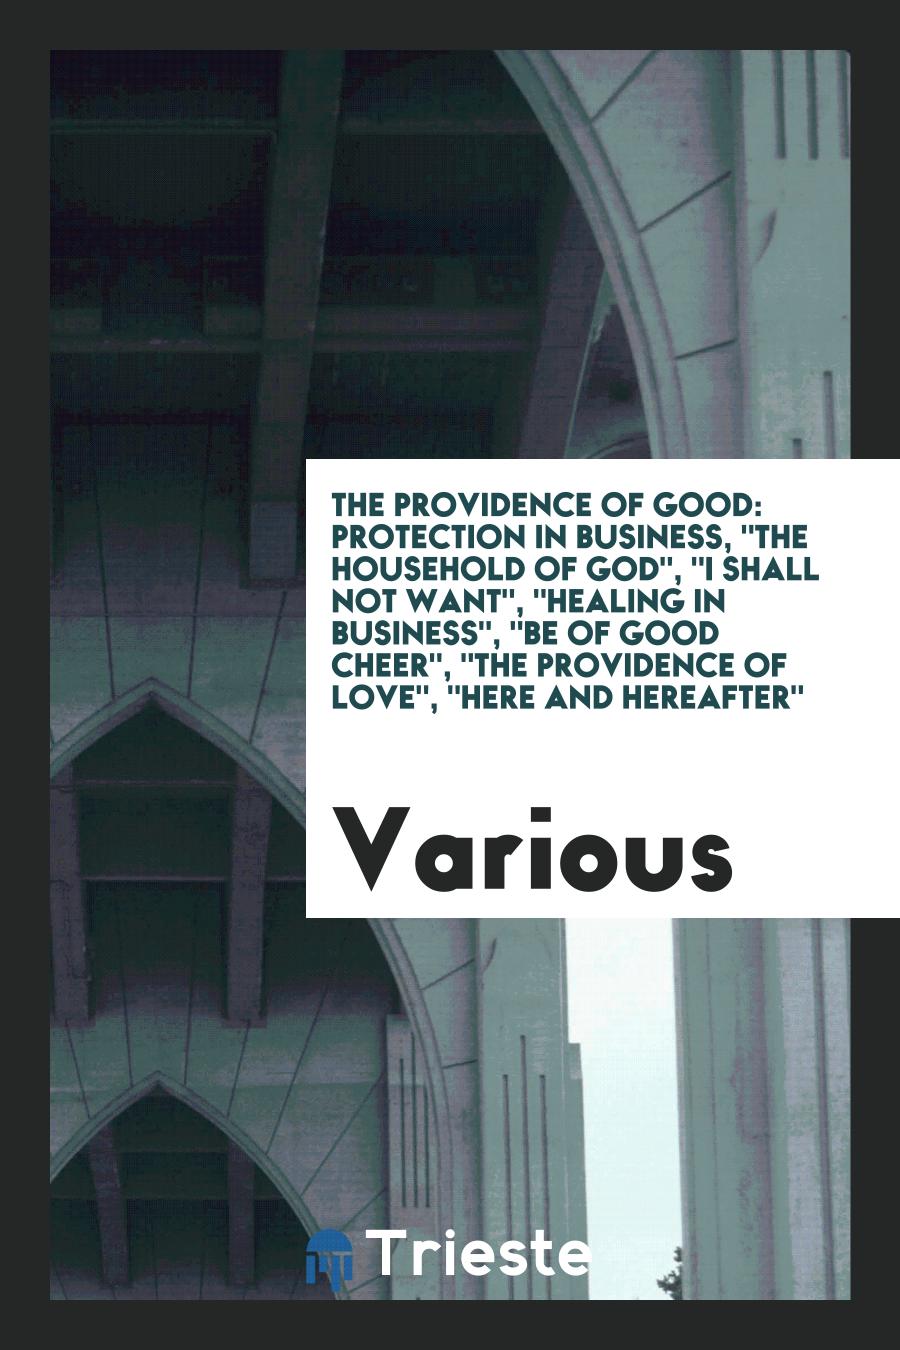 The providence of good: Protection in business, "The household of God", "I shall not want", "Healing in business", "Be of good cheer", "The providence of Love", "Here and hereafter"